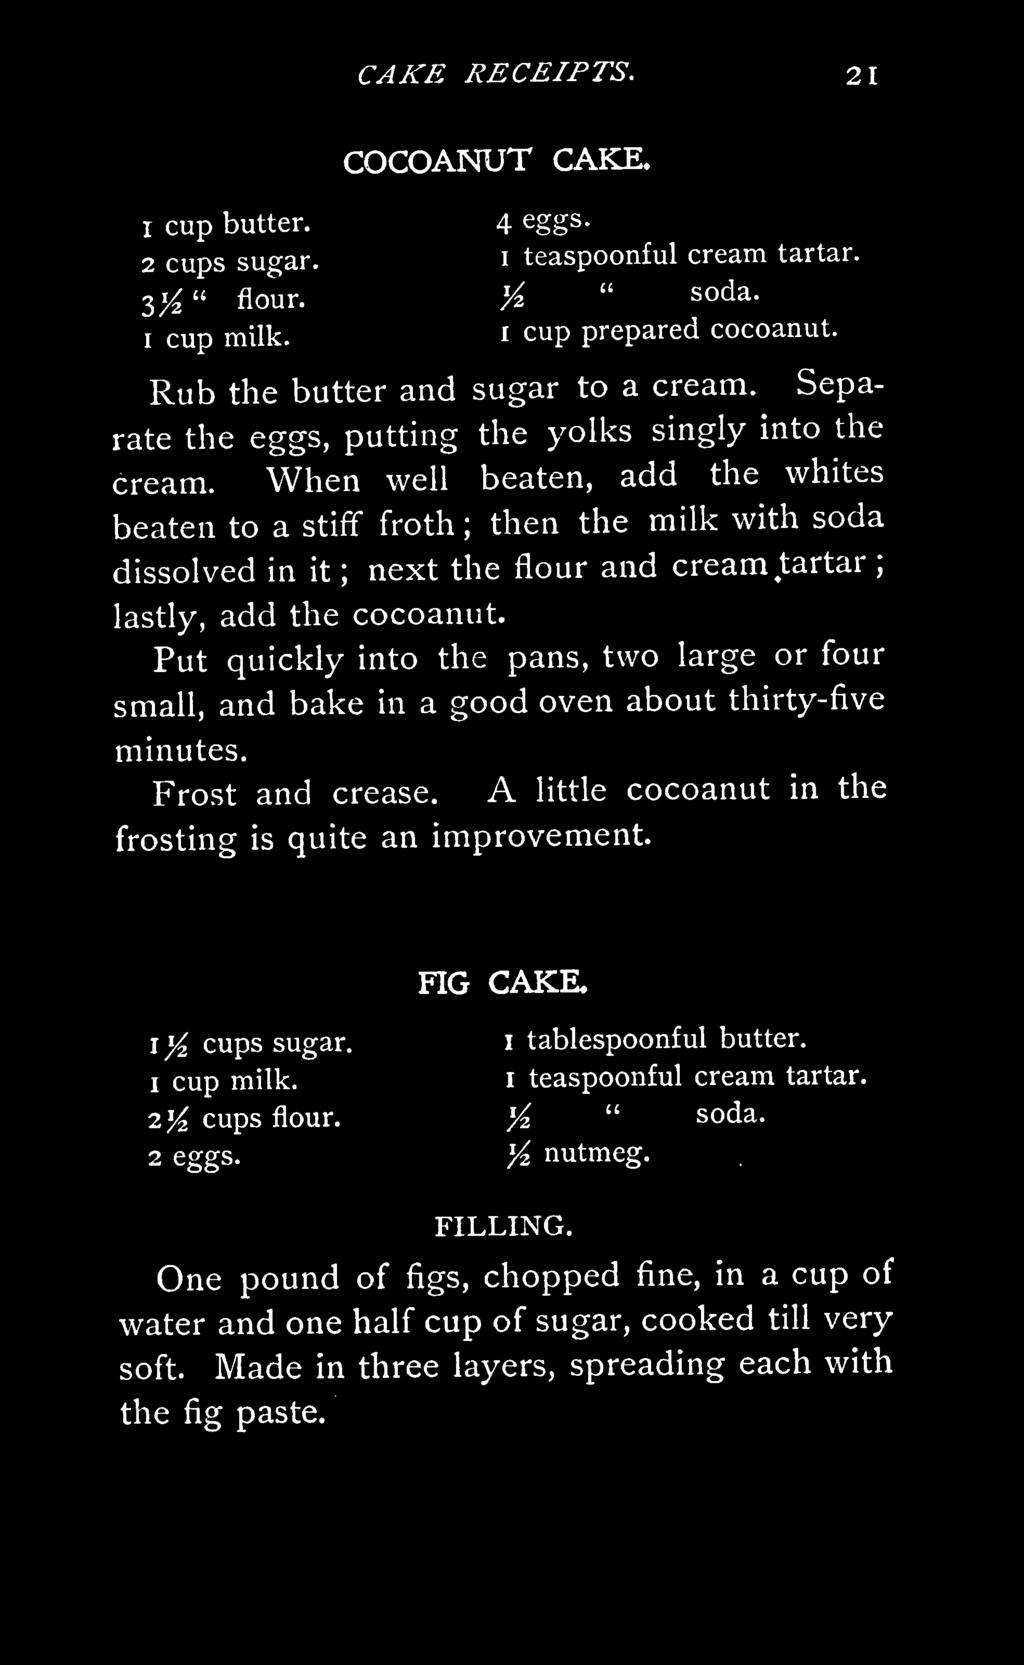 When well beaten, add the whites beaten to a stiff froth; then the milk with soda dissolved in it ; next the flour and cream tartar ; lastly, add